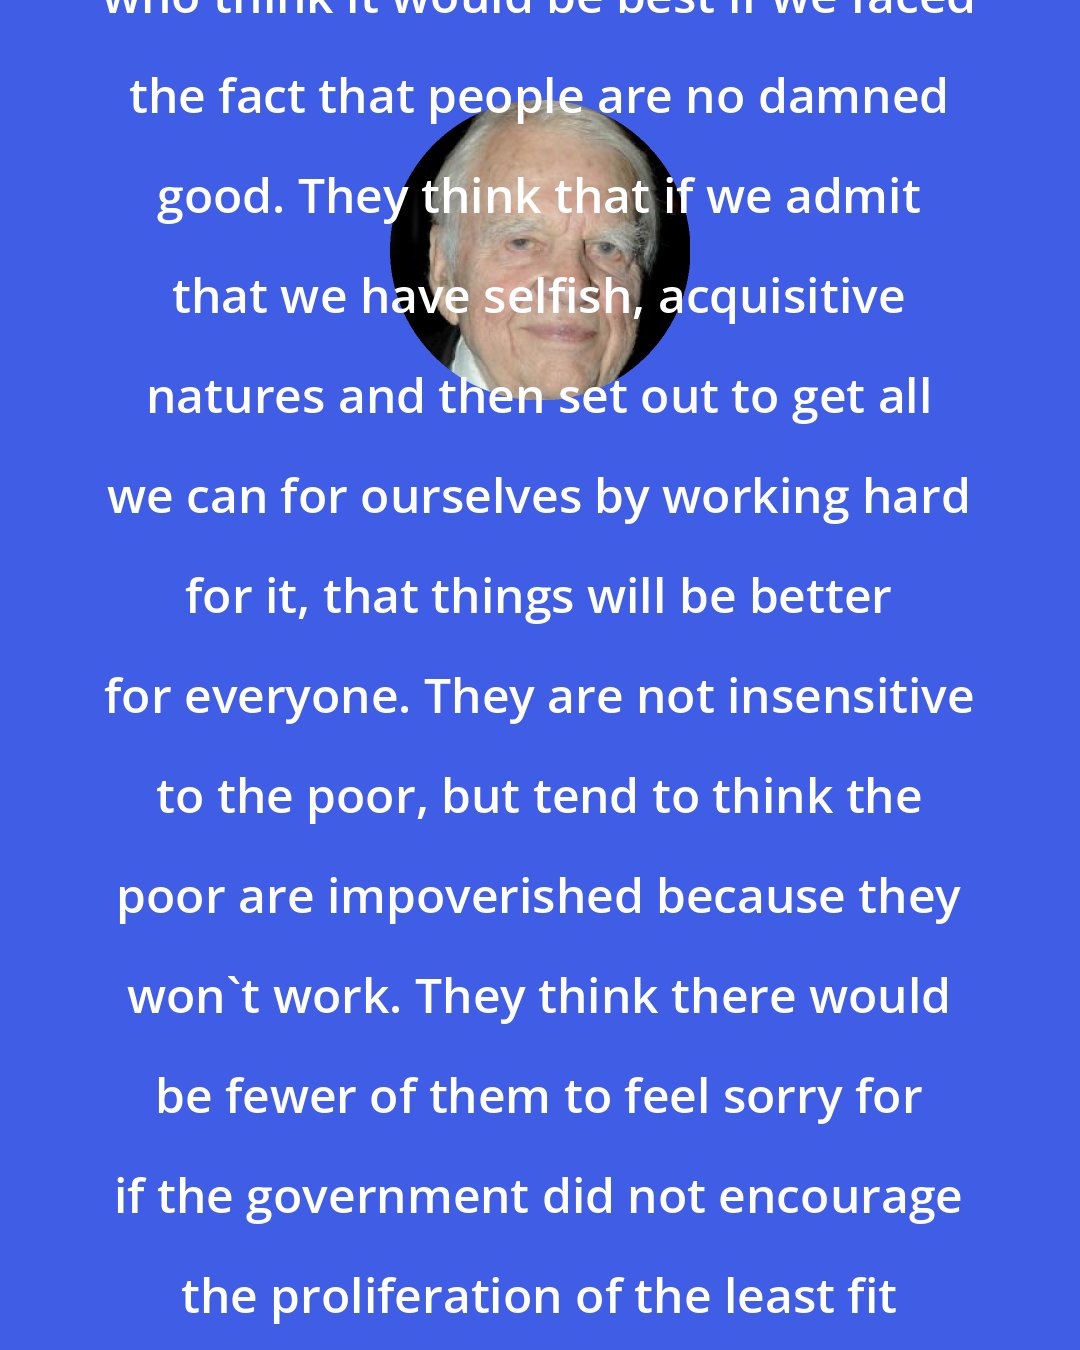 Andy Rooney: Republicans ... are conservatives who think it would be best if we faced the fact that people are no damned good. They think that if we admit that we have selfish, acquisitive natures and then set out to get all we can for ourselves by working hard for it, that things will be better for everyone. They are not insensitive to the poor, but tend to think the poor are impoverished because they won't work. They think there would be fewer of them to feel sorry for if the government did not encourage the proliferation of the least fit among us with welfare programs.